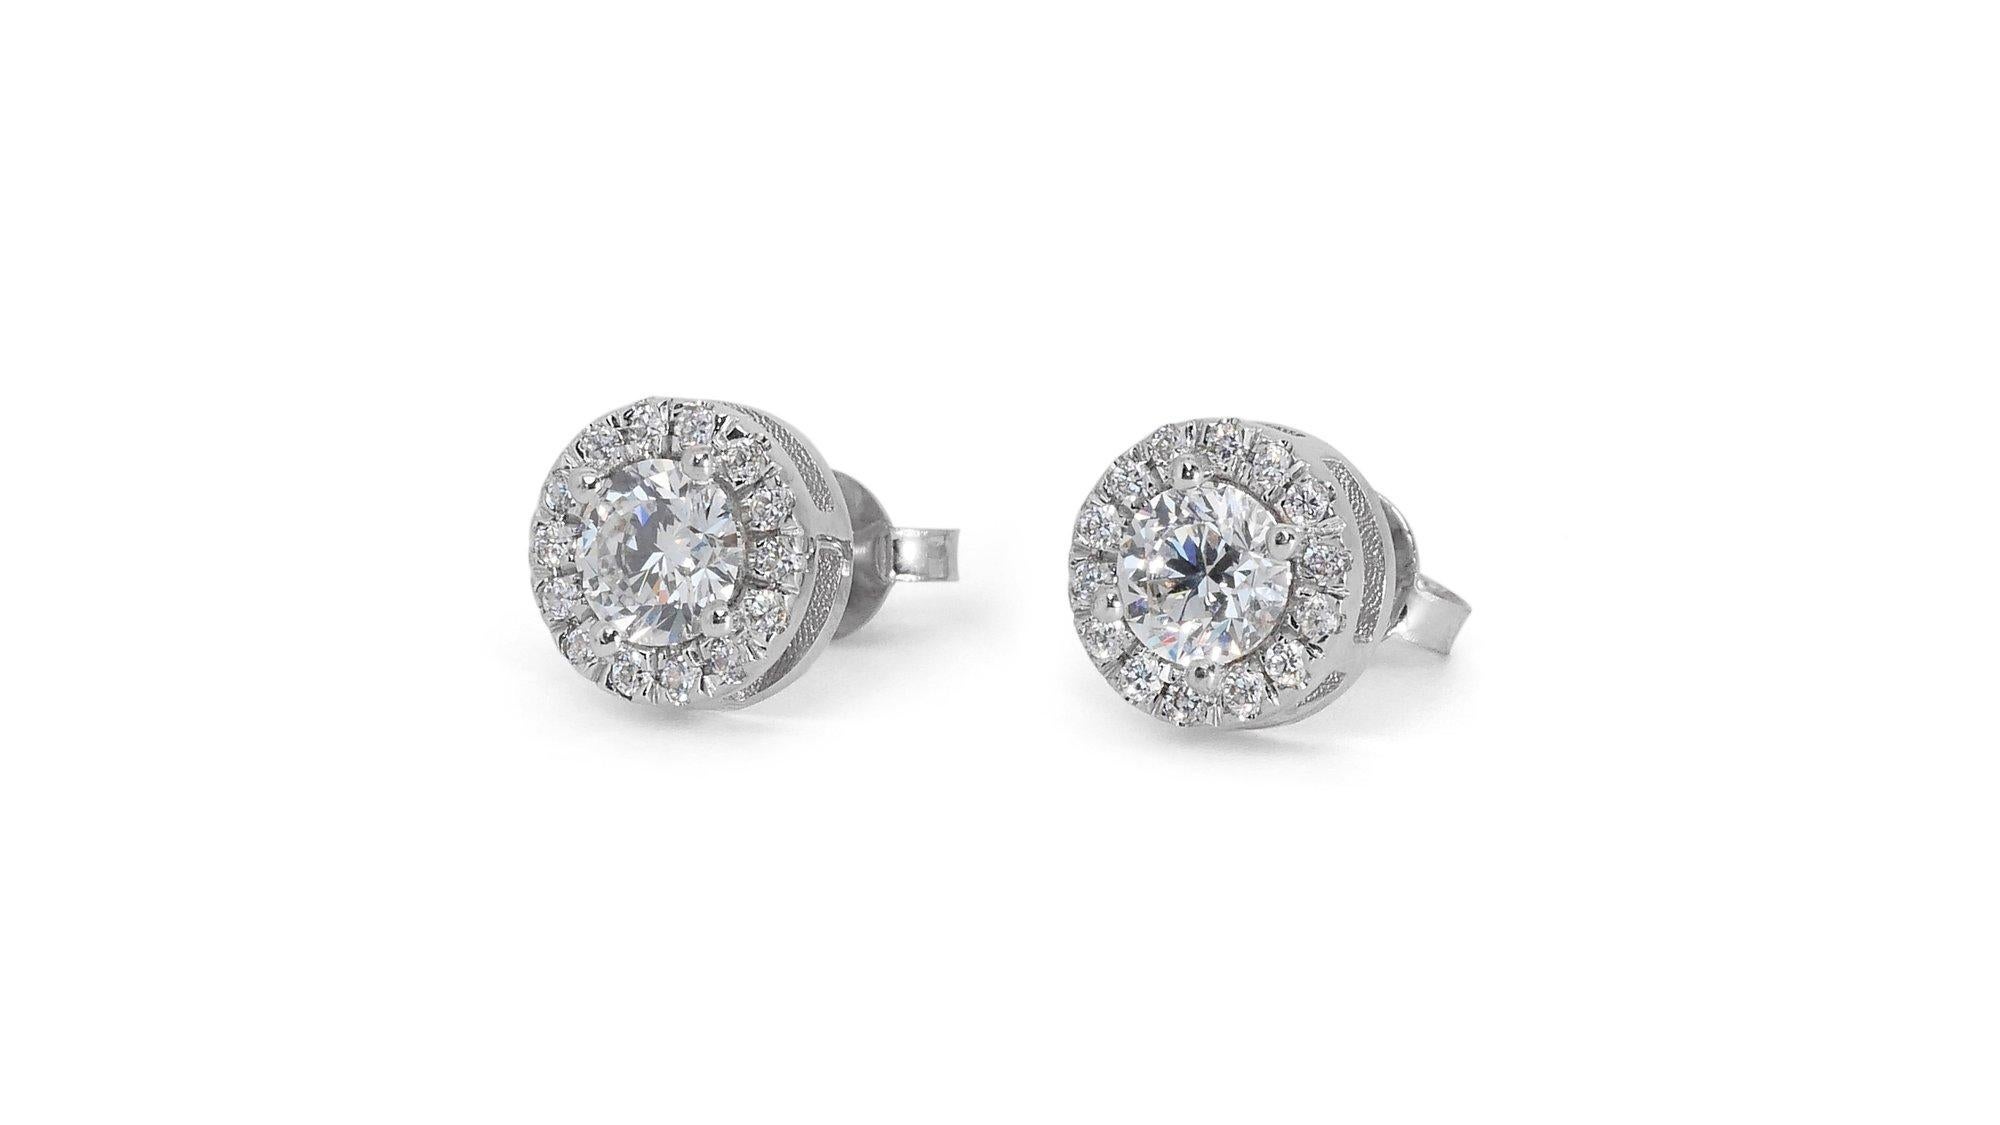 Dazzling 1.65ct Diamond Halo Stud Earrings in 18k White Gold - GIA Certified

Indulge in timeless elegance with these exquisite diamond halo stud earrings. Featuring a pair of mesmerizing round-cut diamonds, boasting an impressive 1.40 carats, these